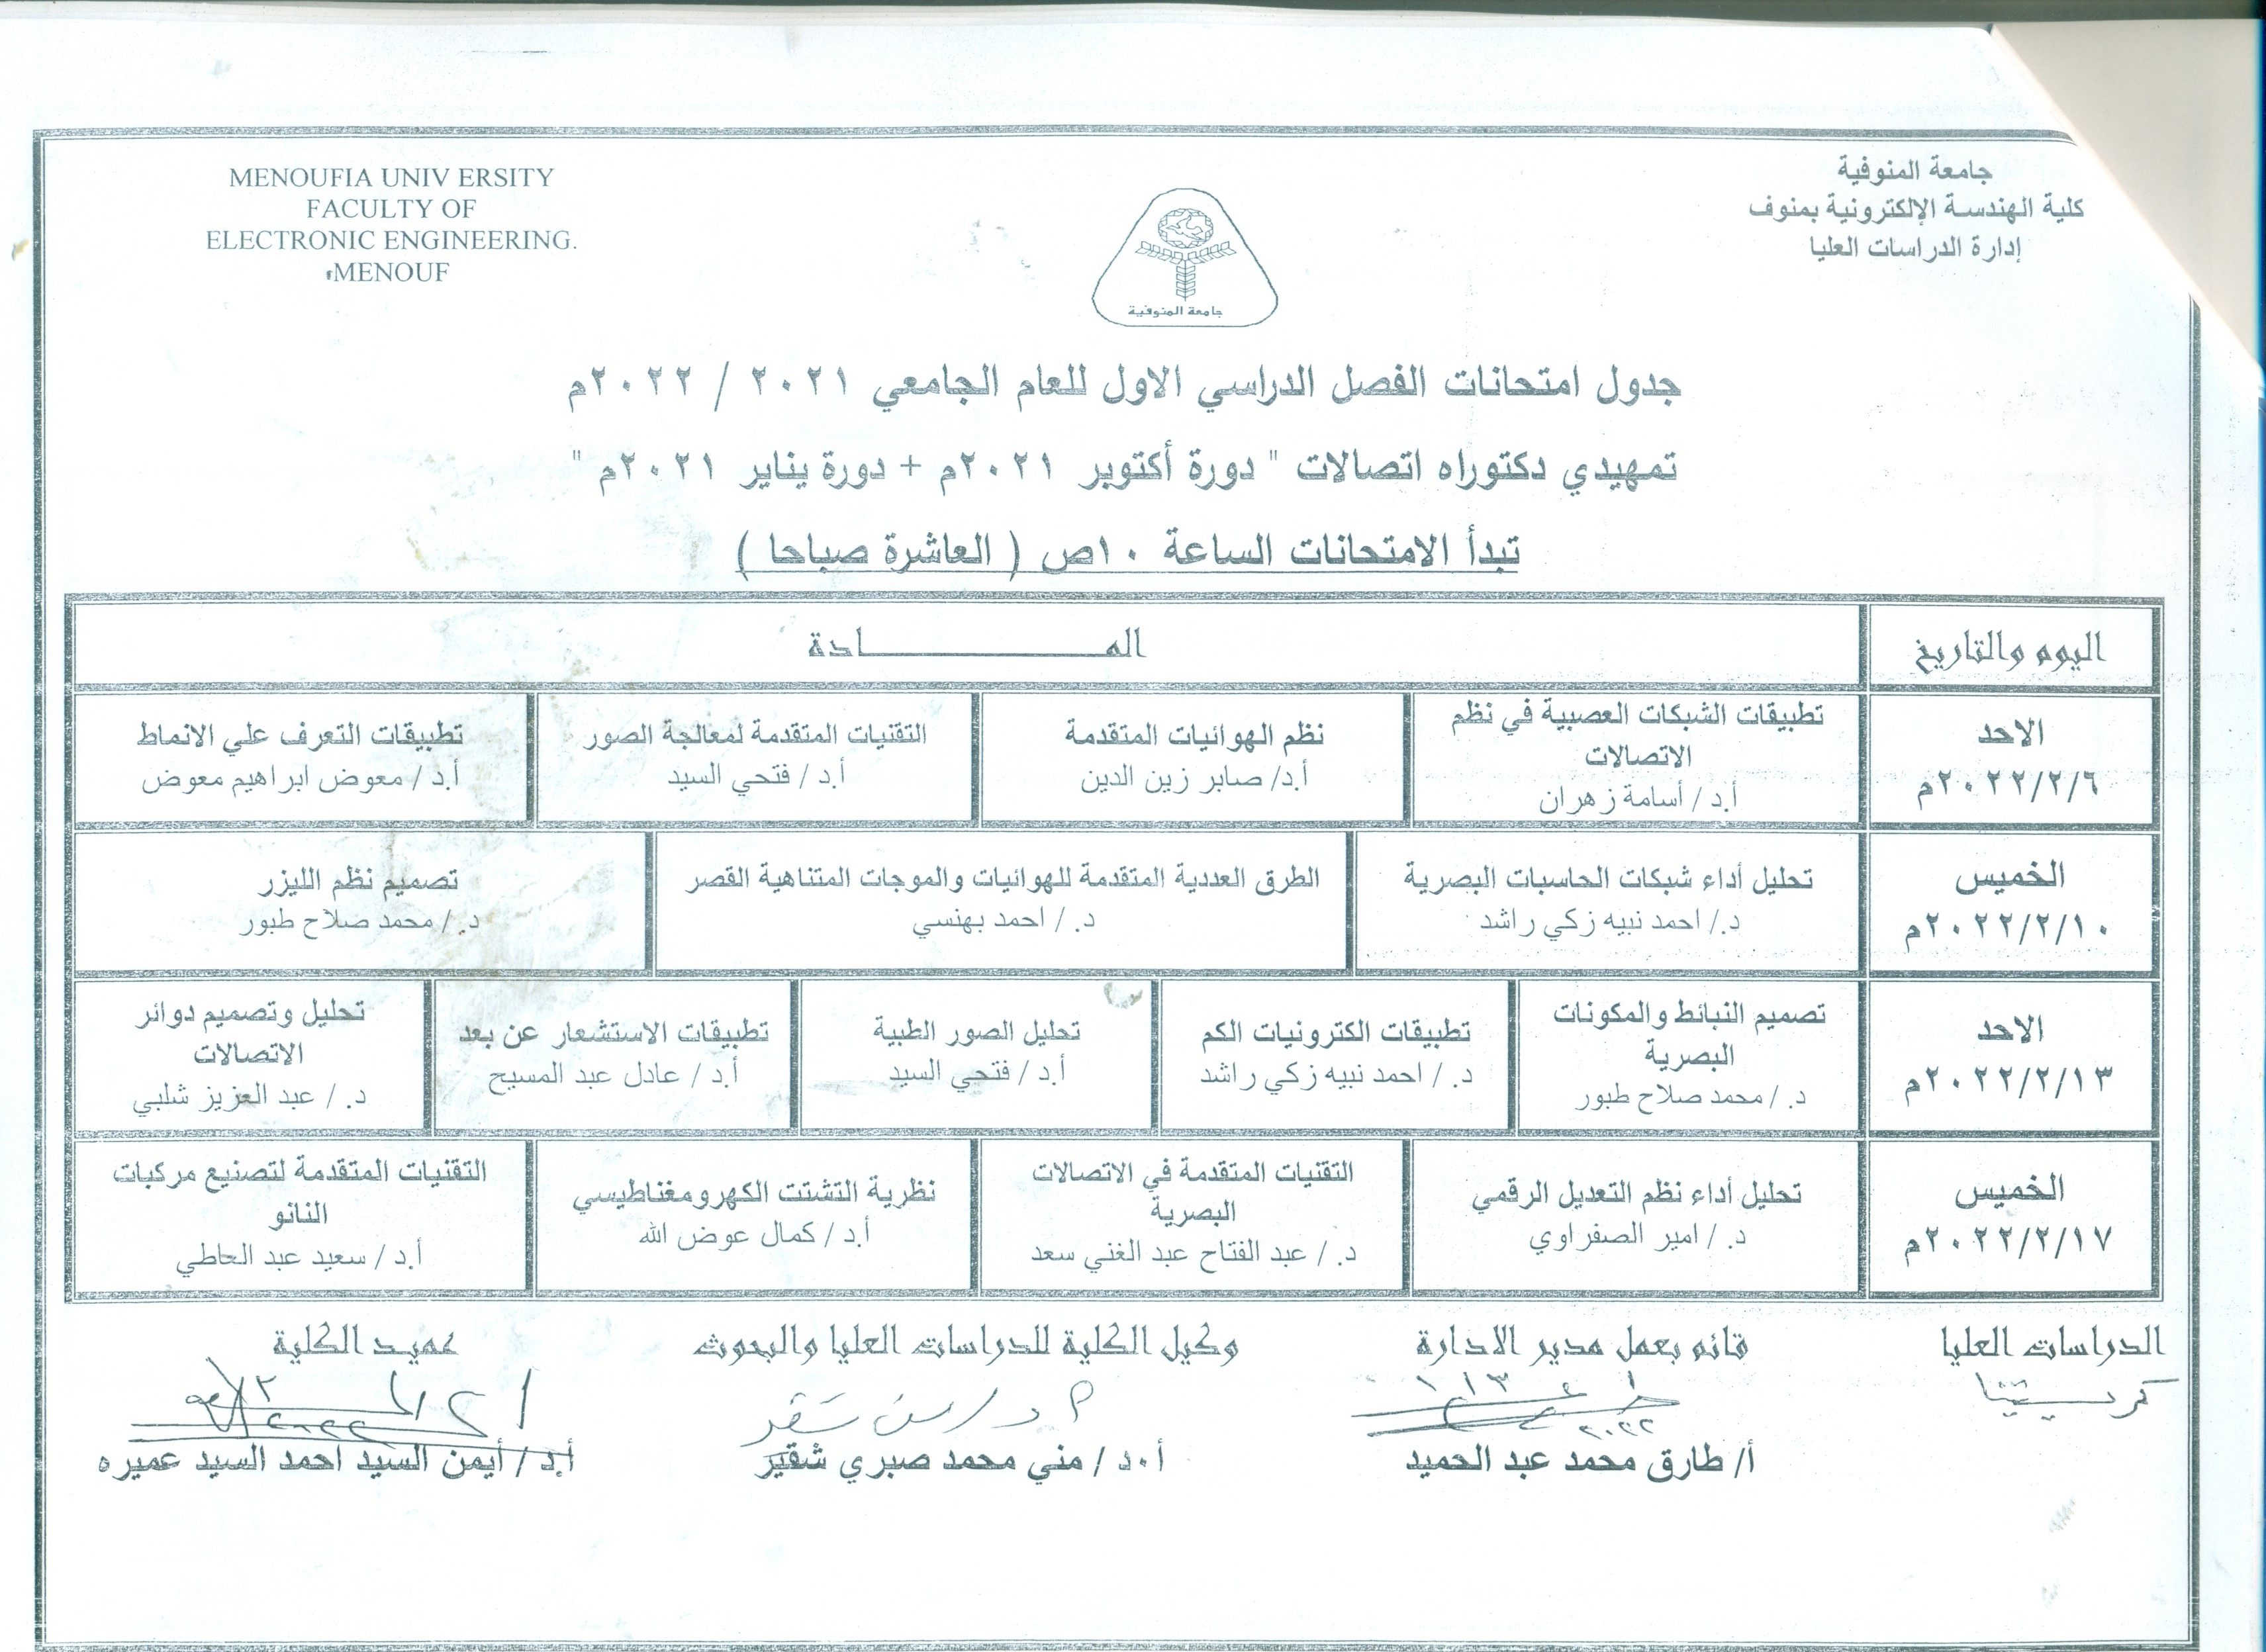 Pre-PhD Exam Schedule, Department of Communications